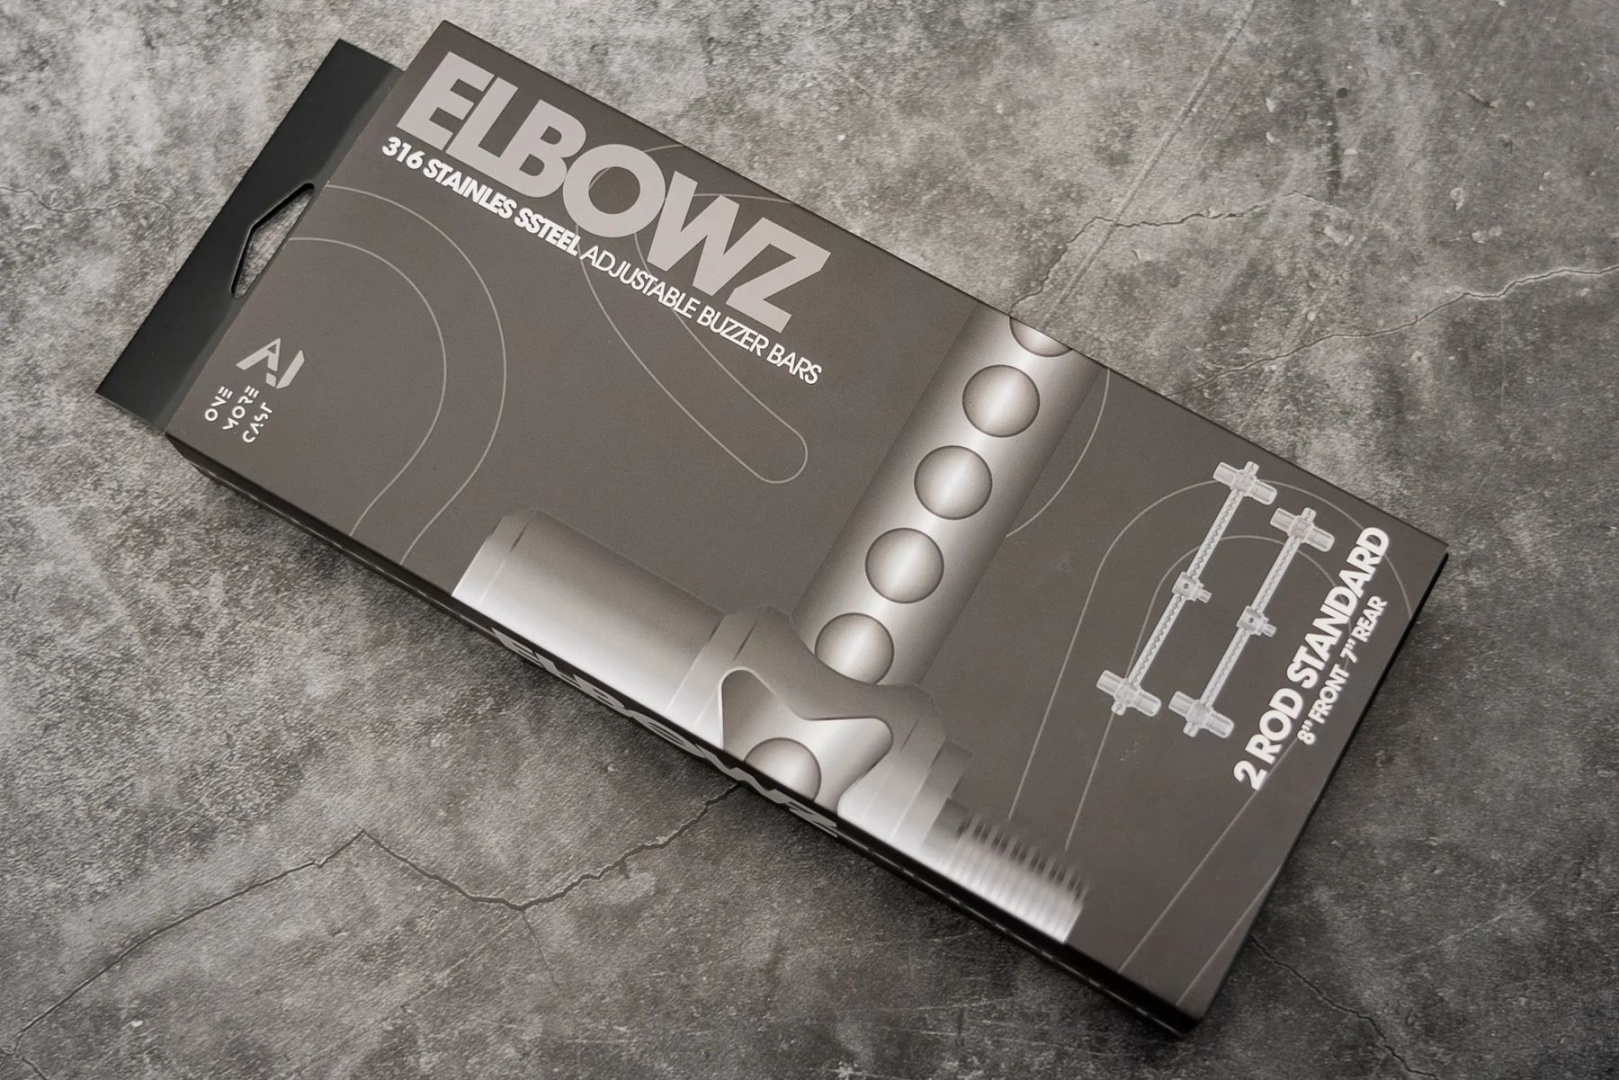 One More Cast Elbowz High-Grade 316 Stainless Steel 2 Rod Buzzbars 